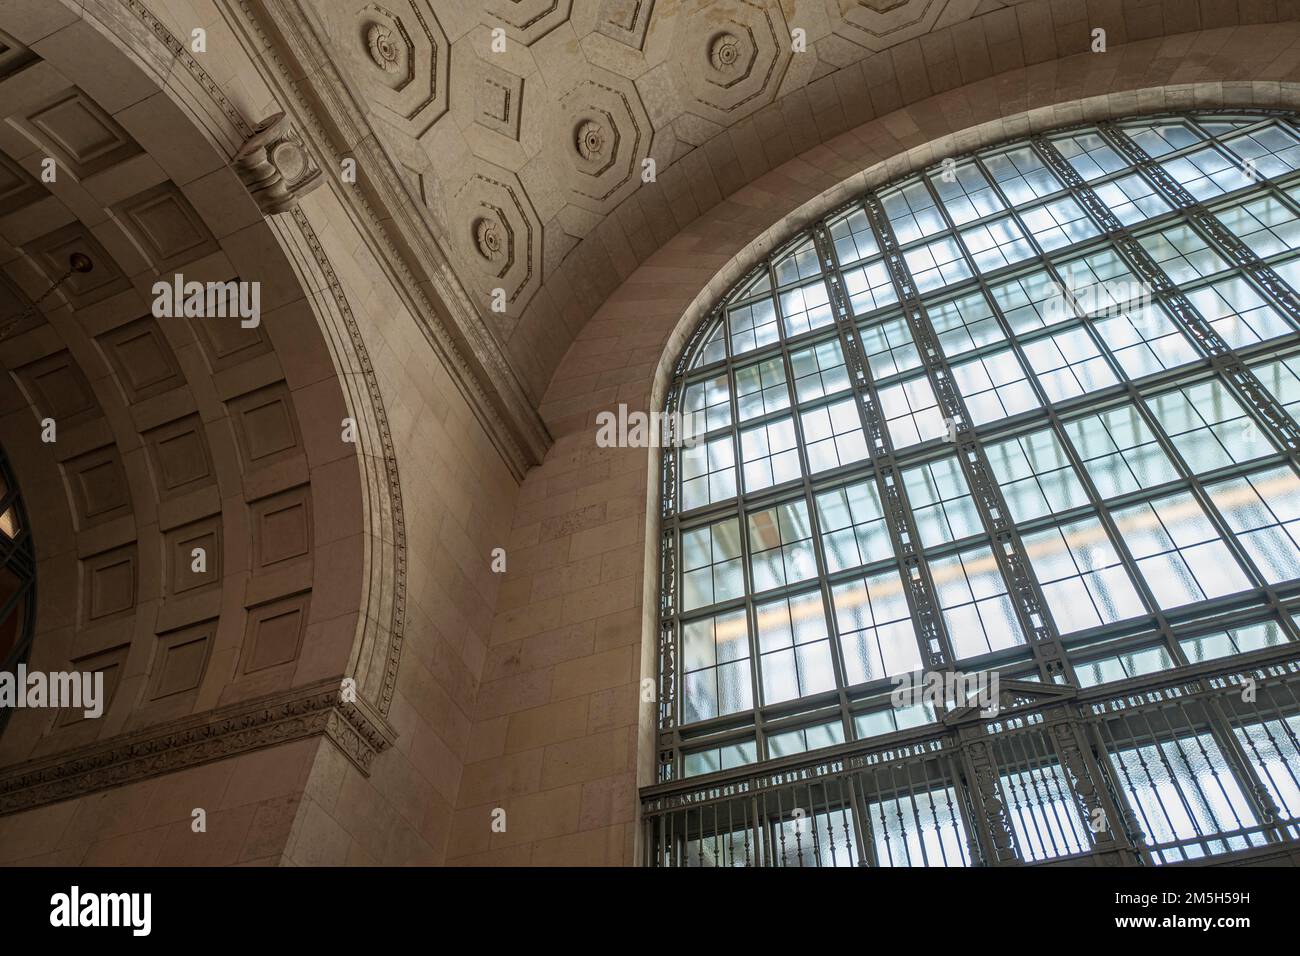 Toronto- Canada- Circa Augus 2019. Architecture detail of ceiling and big window at urban train Union Station in Toronto. Neoclassical Building Stock Photo